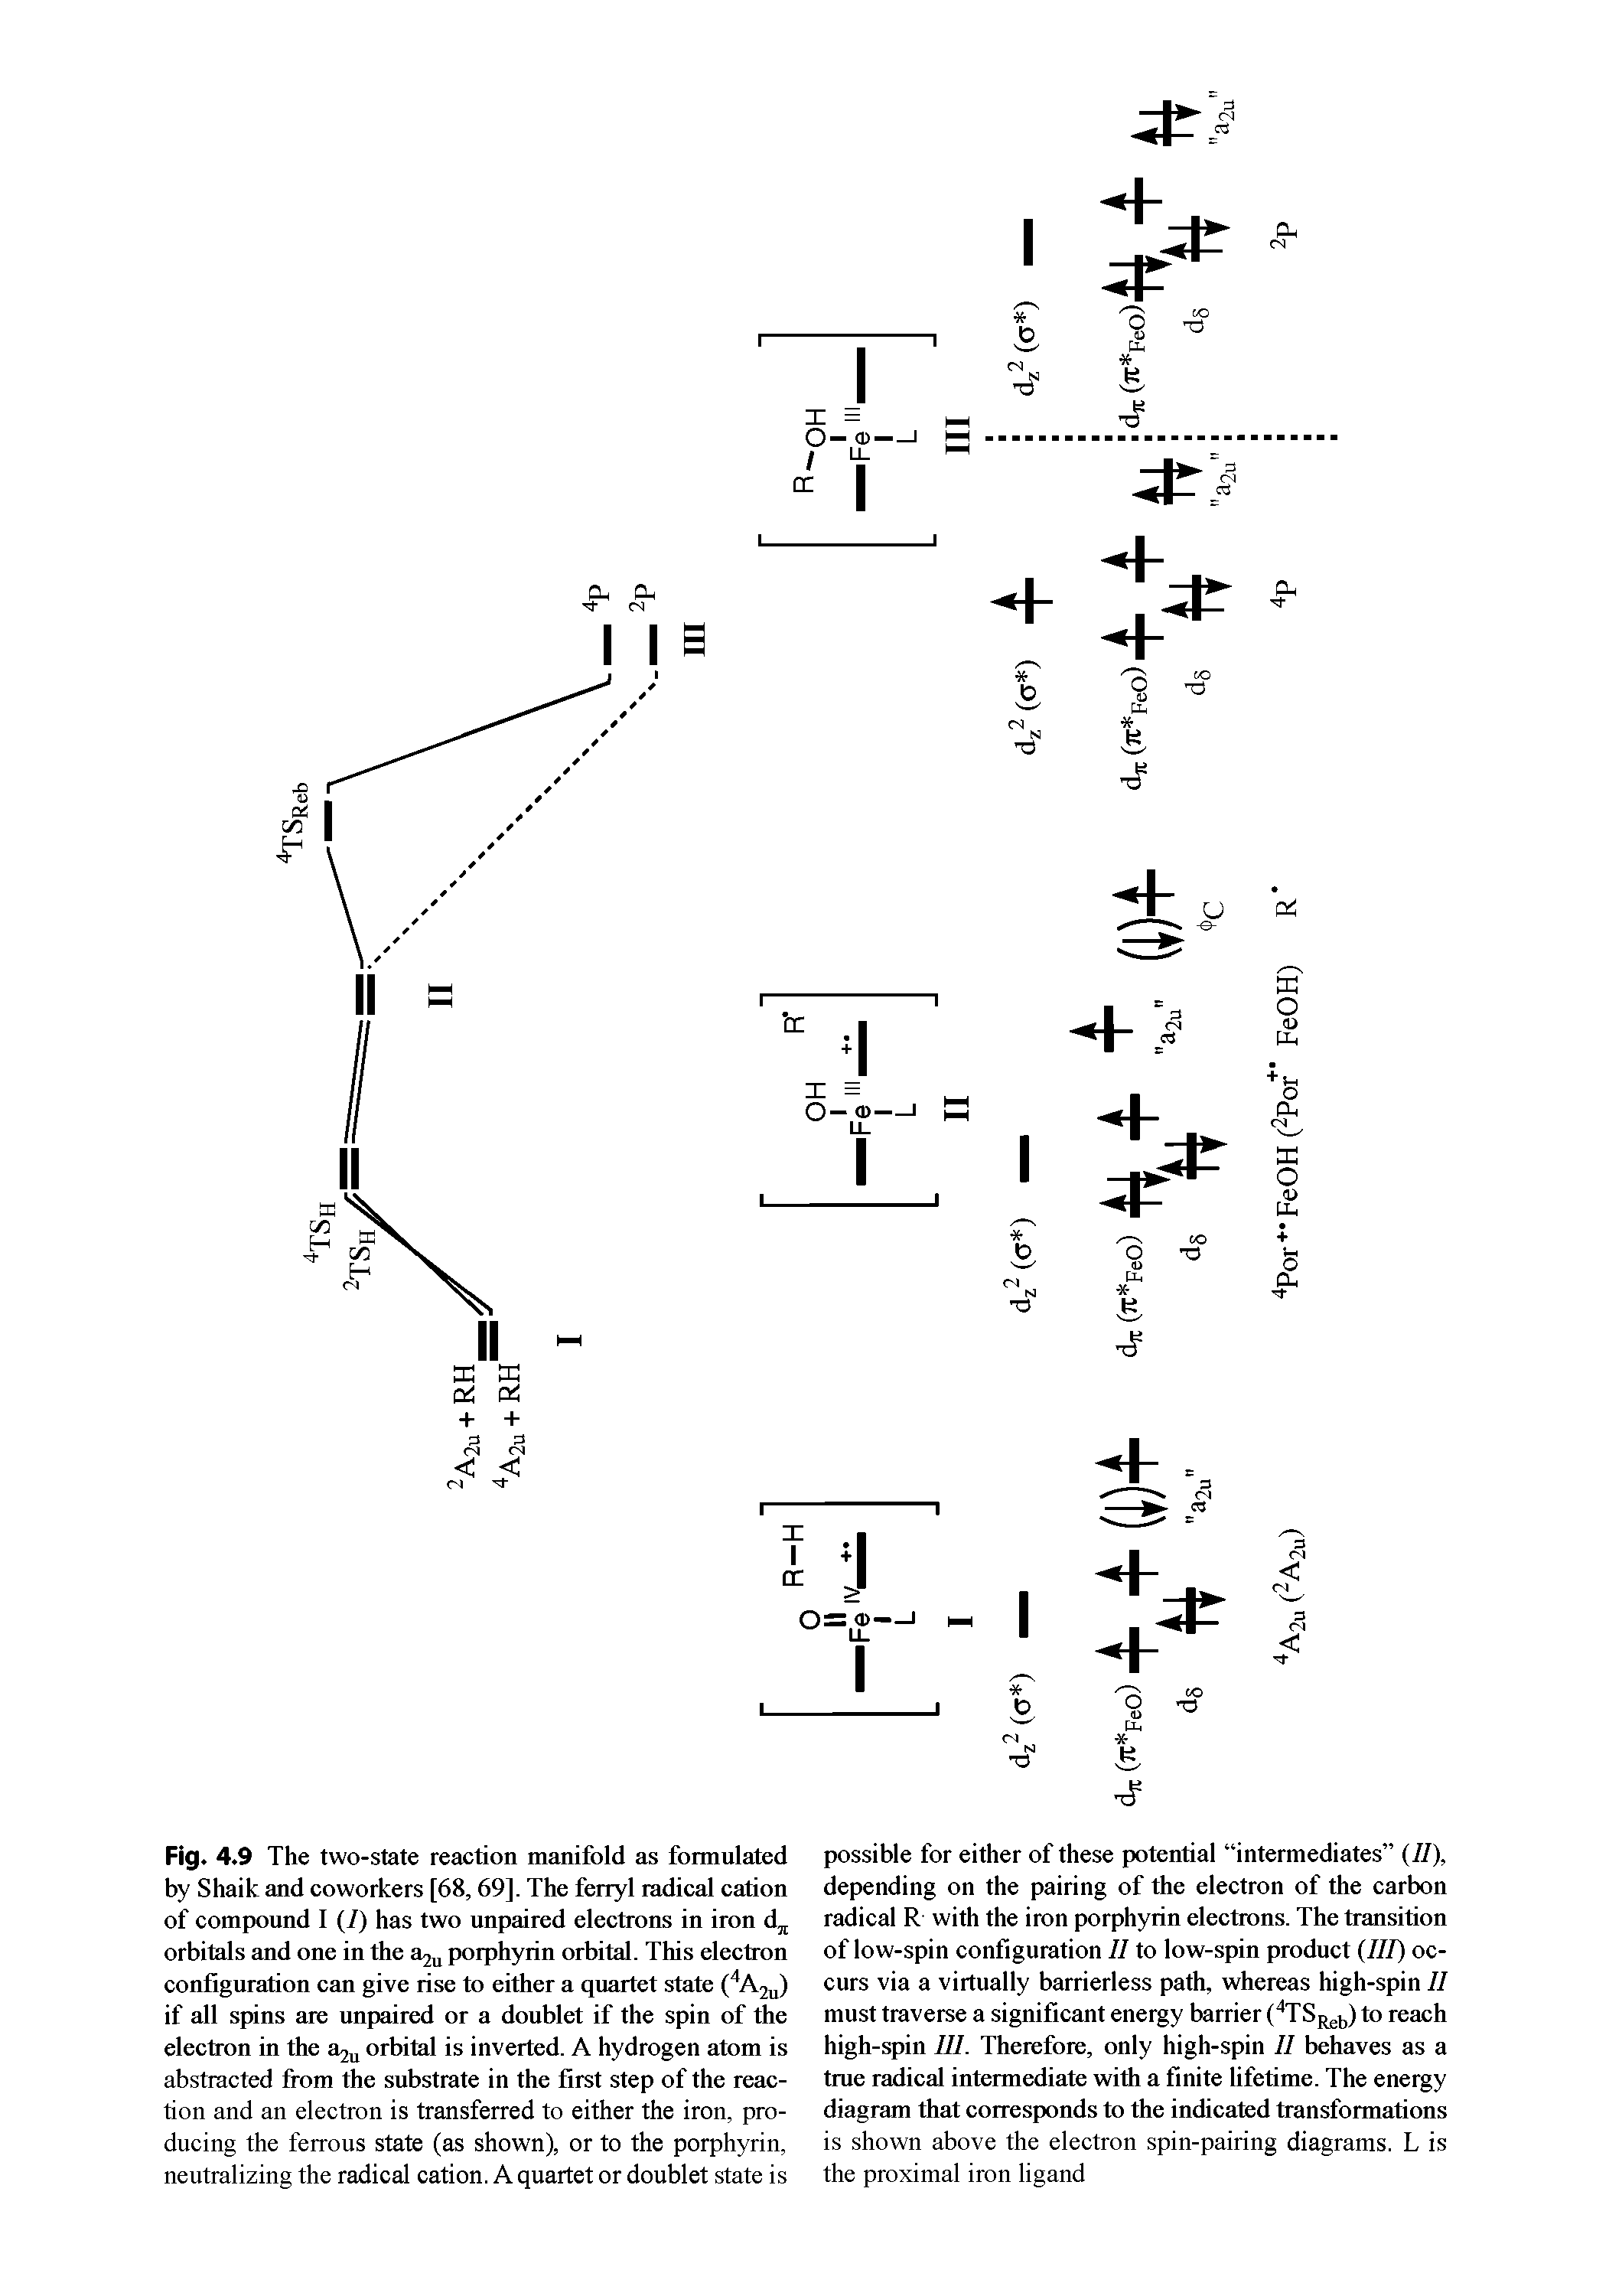 Fig. 4.9 The two-state reaction manifold as formulated by Shade and coworkers [68,69]. The ferryl radical cation of compound I (7) has two unpaired electrons in iron d orbitals and one in the Si2u porphyrin orbital. This electron configuration can give rise to either a quartet state ( Aju) if all spins are unpaired or a doublet if the spin of the electron in the aju orbital is inverted. A hydrogen atom is abstracted fi om the substrate in the first step of the reaction and an electron is transferred to either the iron, producing the ferrous state (as shown), or to the porphyrin, neutralizing the radical cation. A quartet or doublet state is...